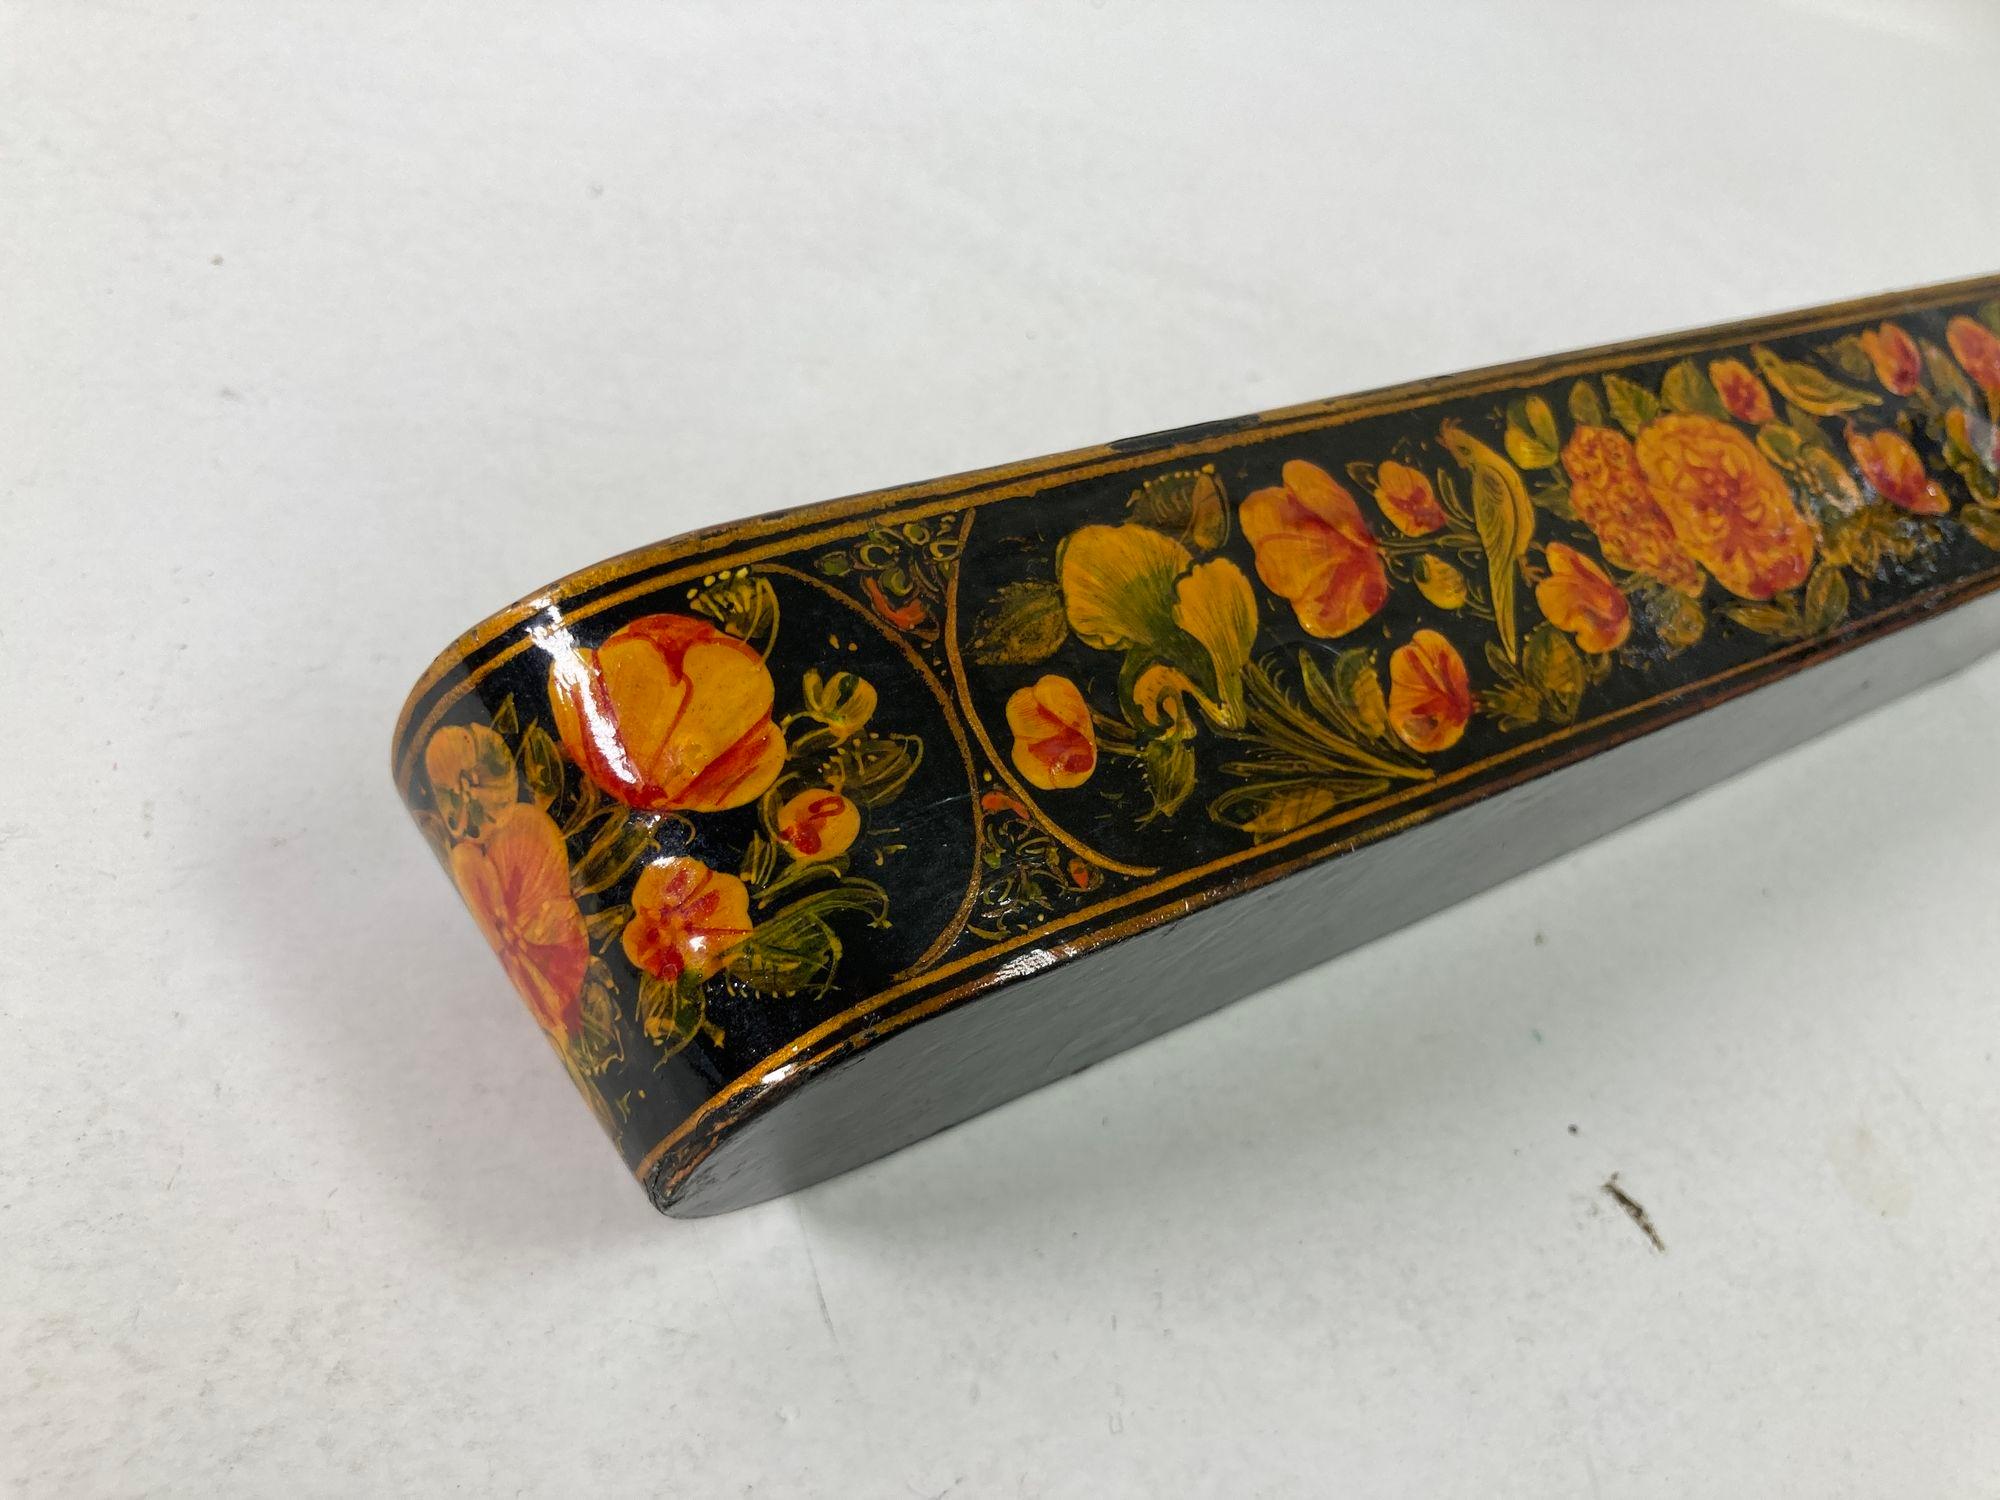 Persian Qajar Lacquer Pen Box Hand Painted with Floral and Birds Design 6